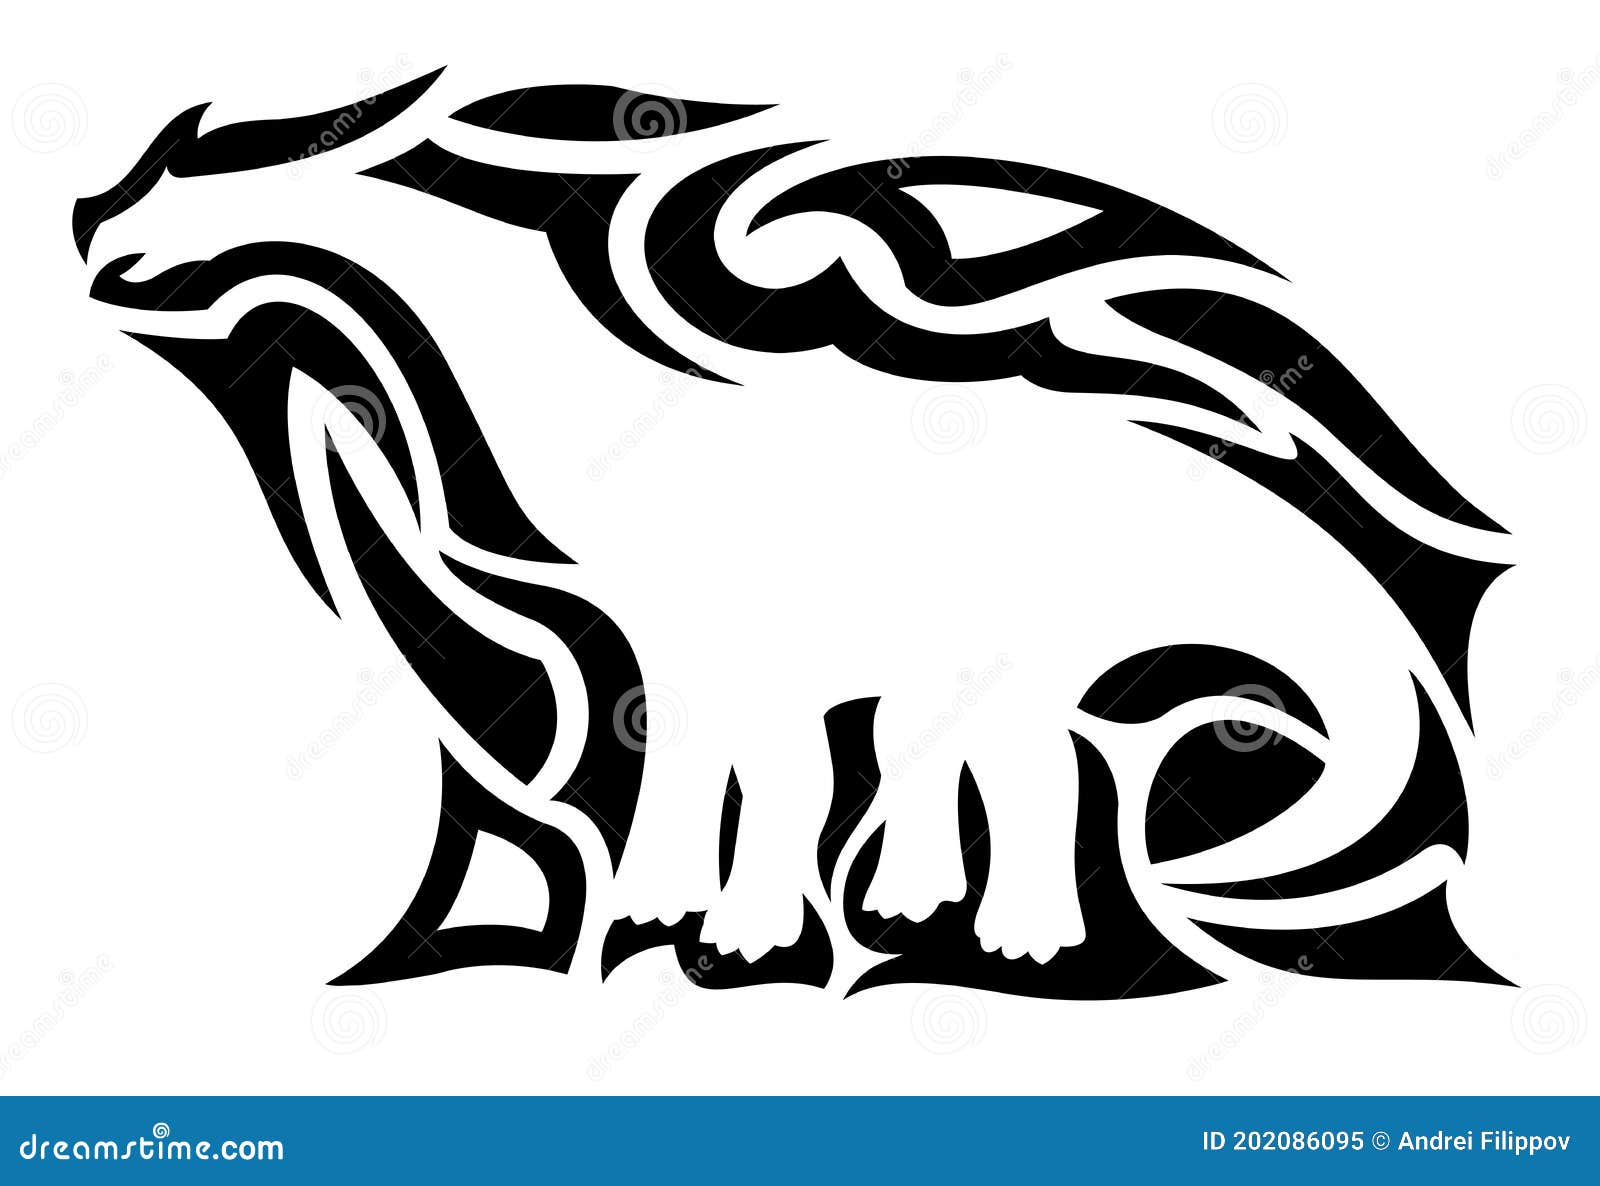 Tribal Tattoo Art with White Dinosaur Silhouette Stock Vector - Illustration of clipart, isolated: 202086095